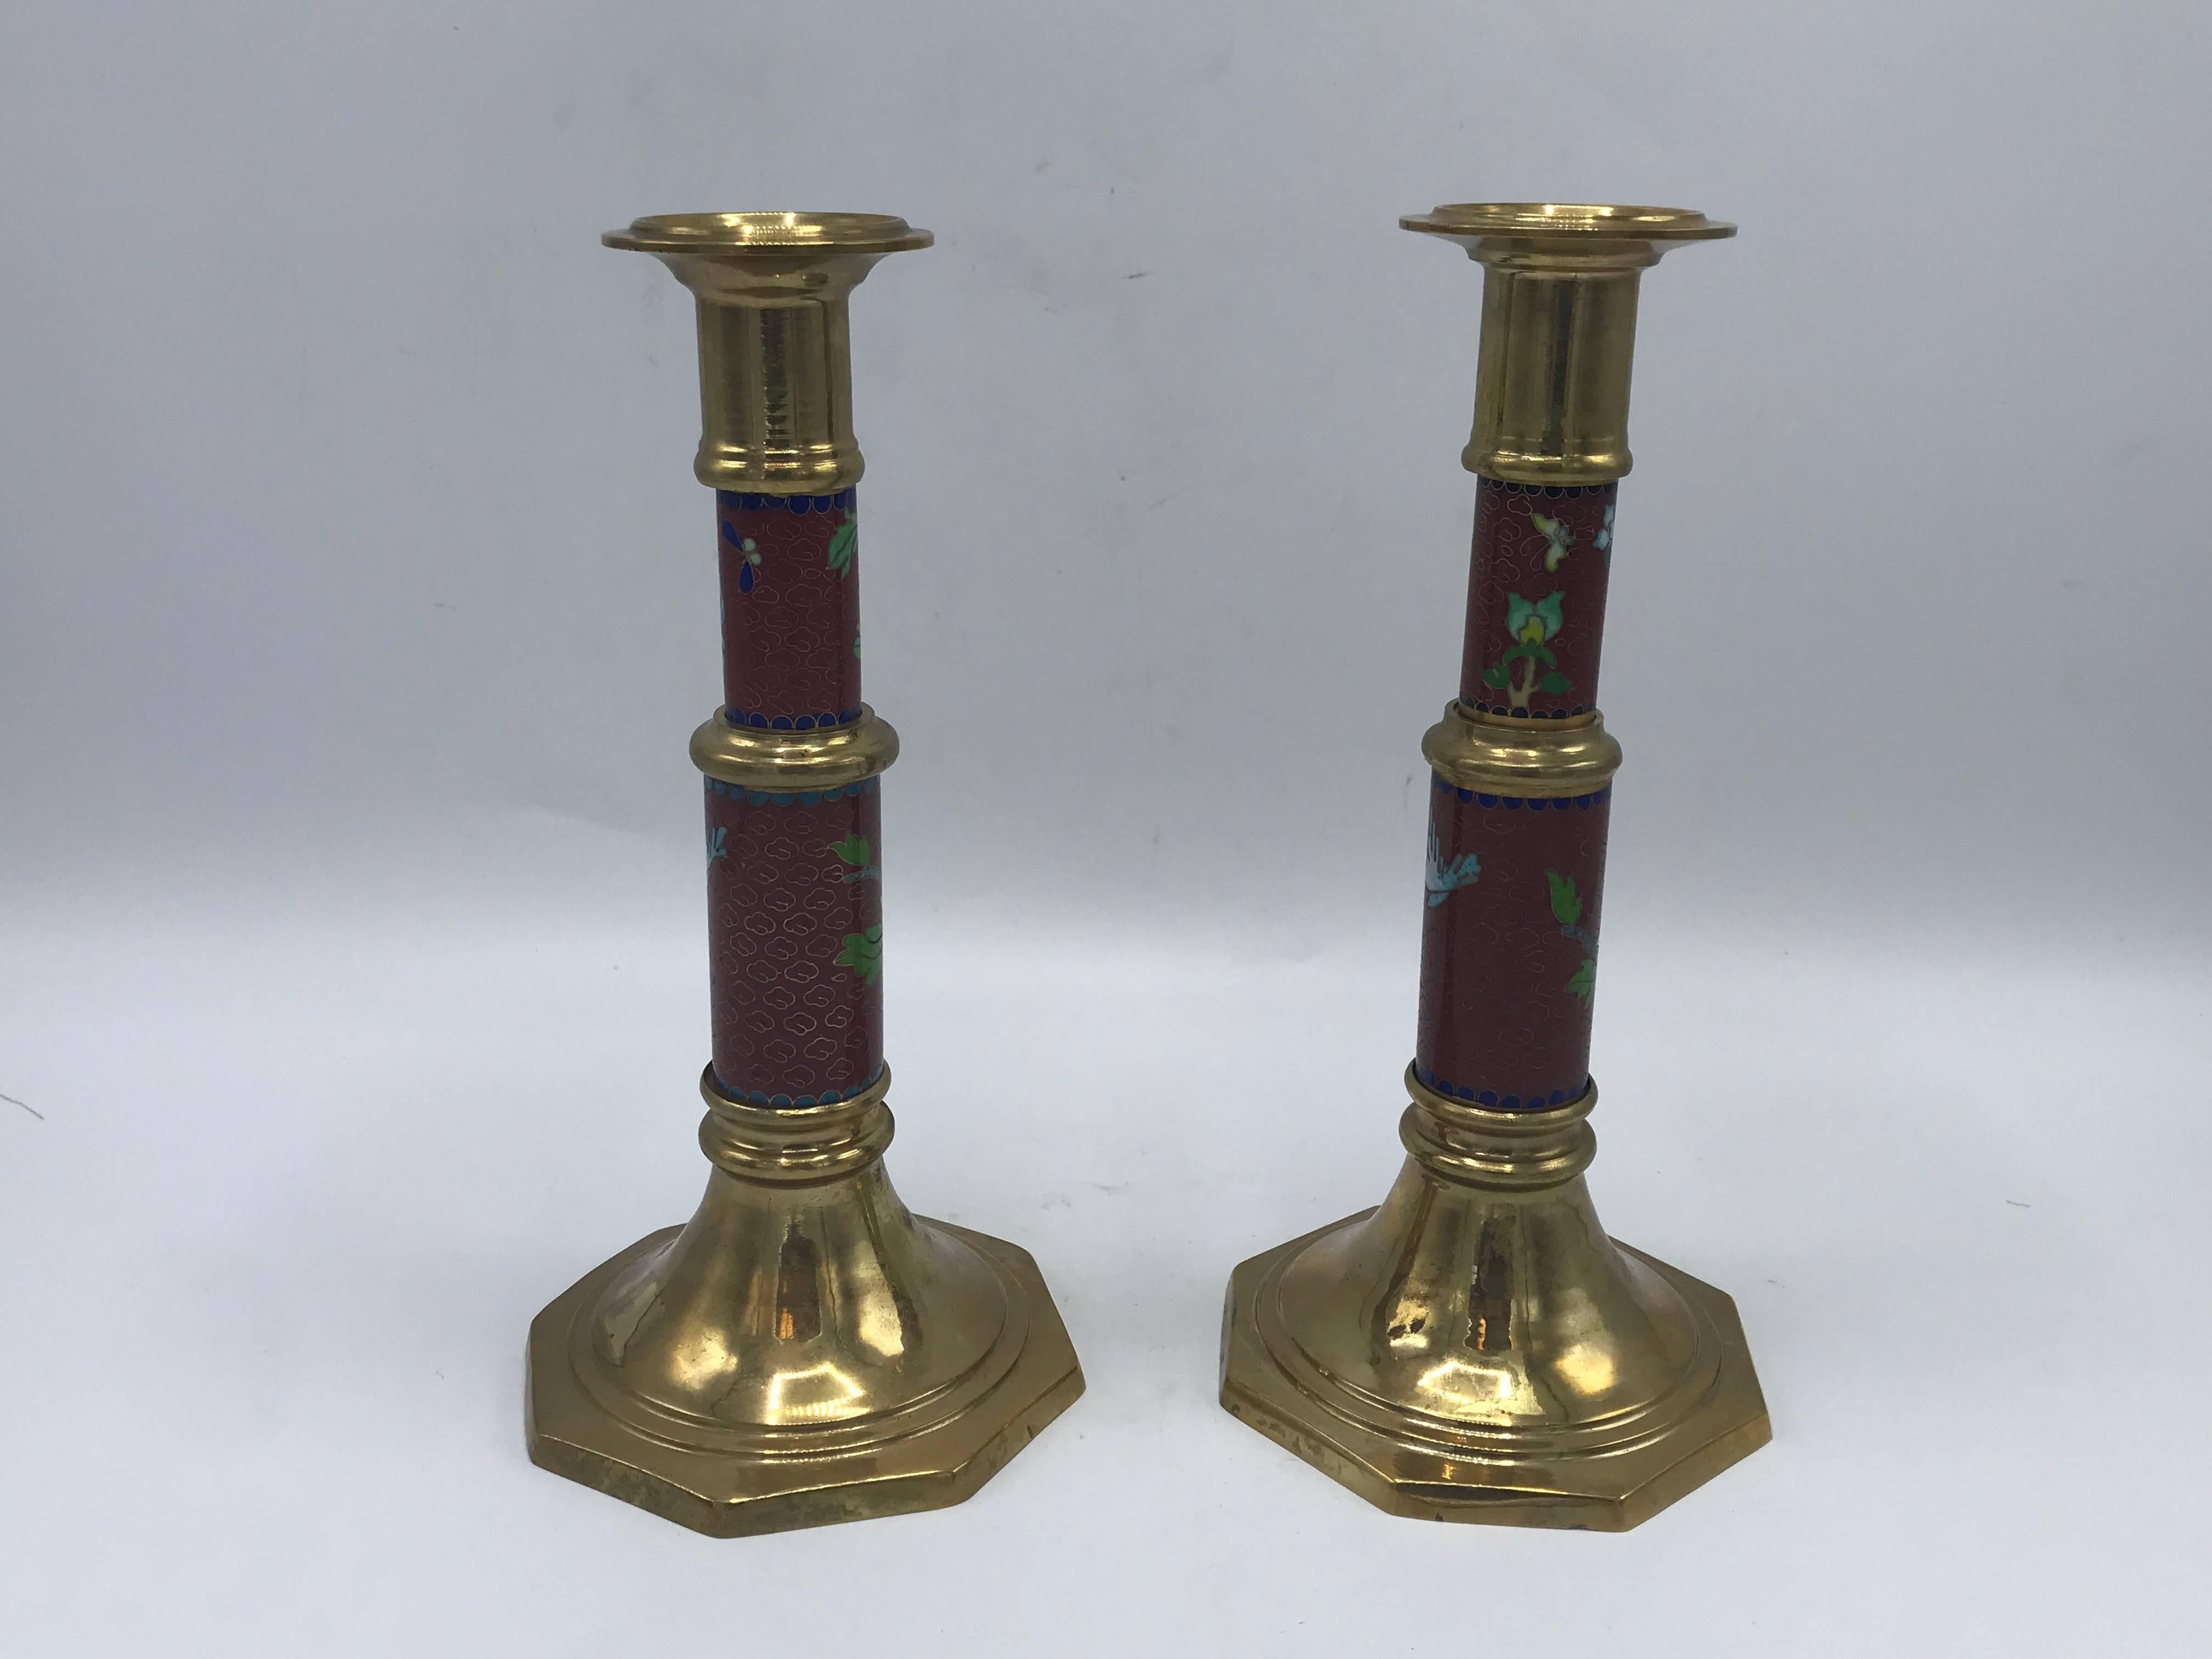 20th Century 1960s Red Cloisonné Brass Candlesticks with Floral Motif, Pair